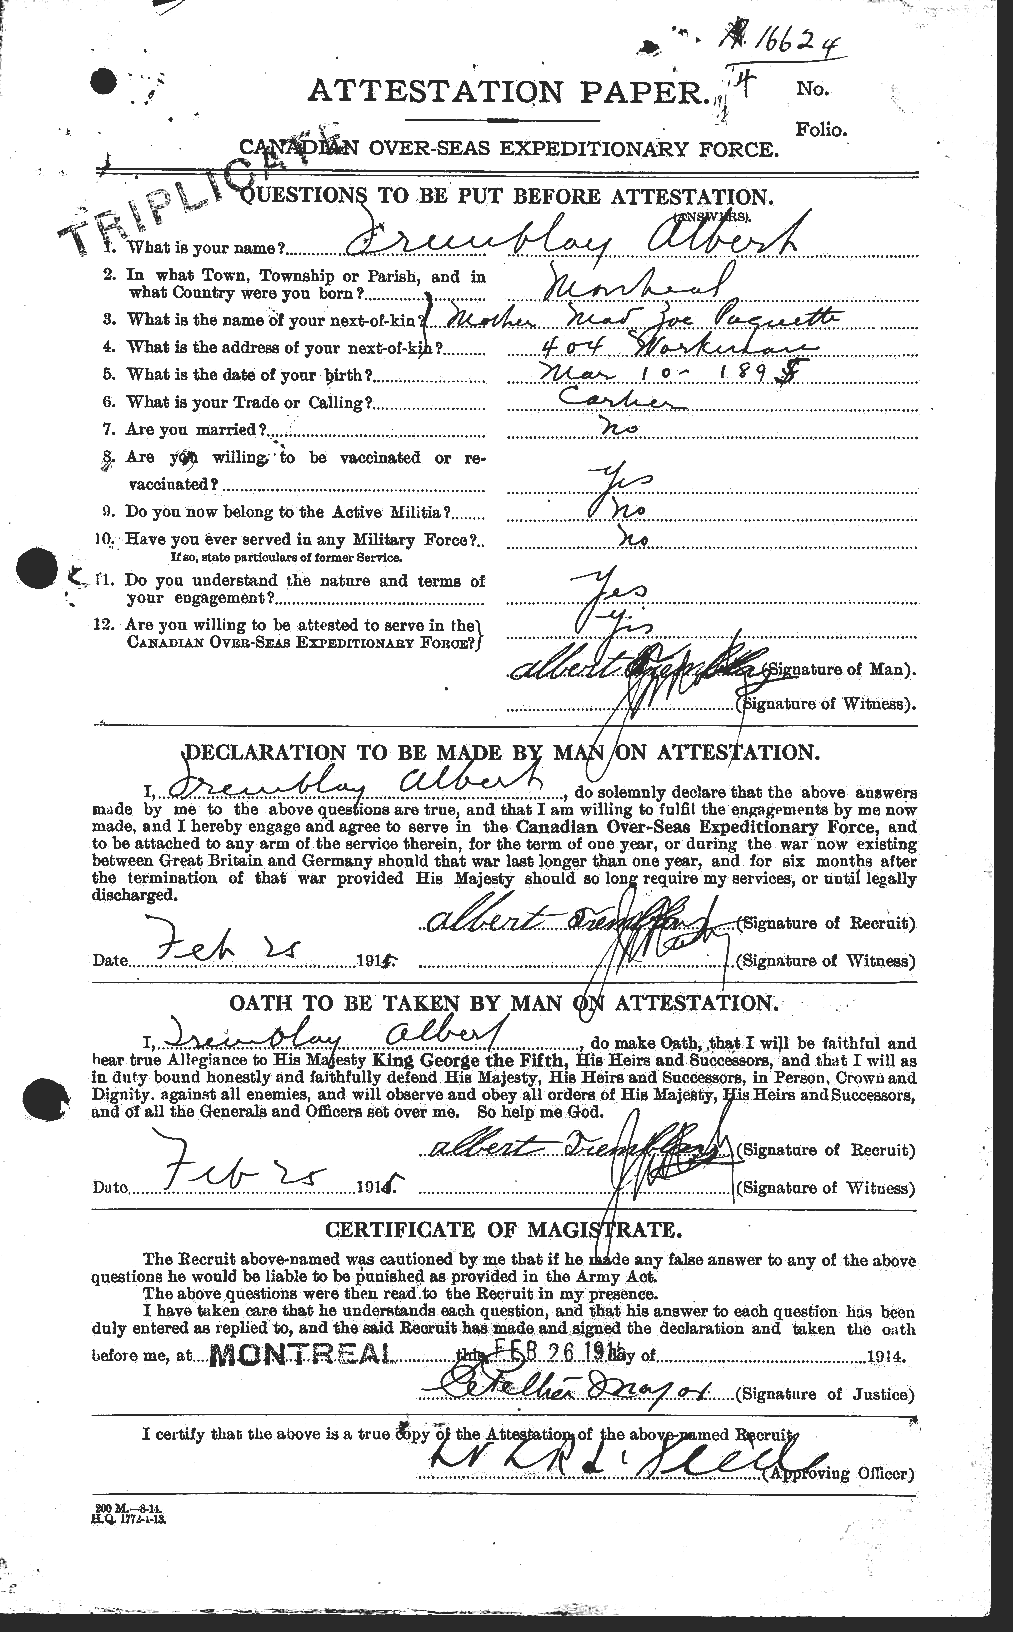 Personnel Records of the First World War - CEF 637575a